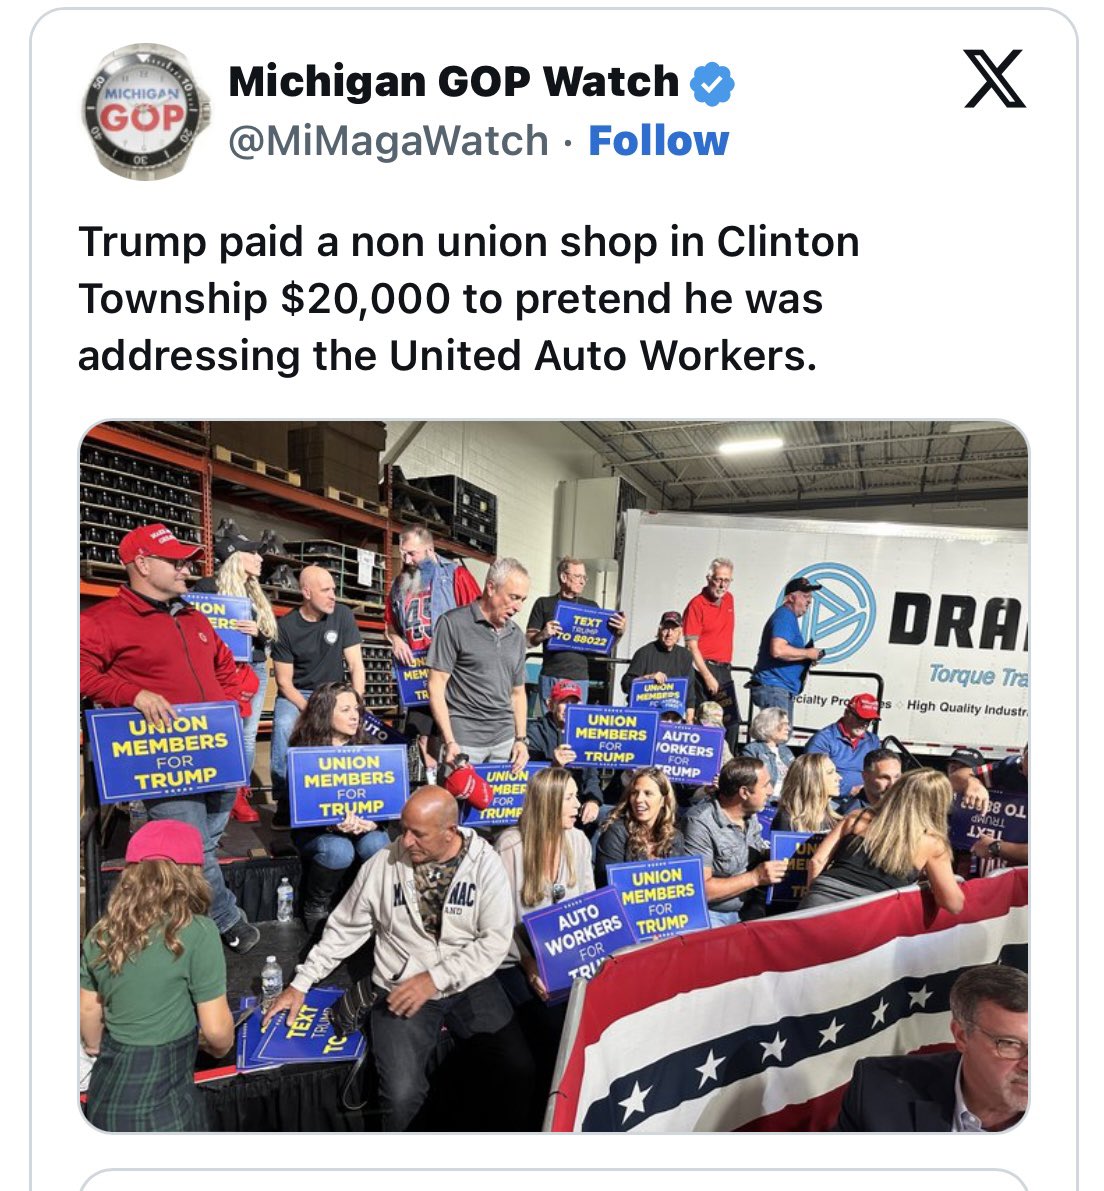 #DemVoice1 President Biden became the first President to join a picket line for the UAW Recently, Biden received the endorsement of the United Auto Workers Union for President Donald Trump countered this by paying a non-union auto parts shop $20,000 to stage a fake event with…